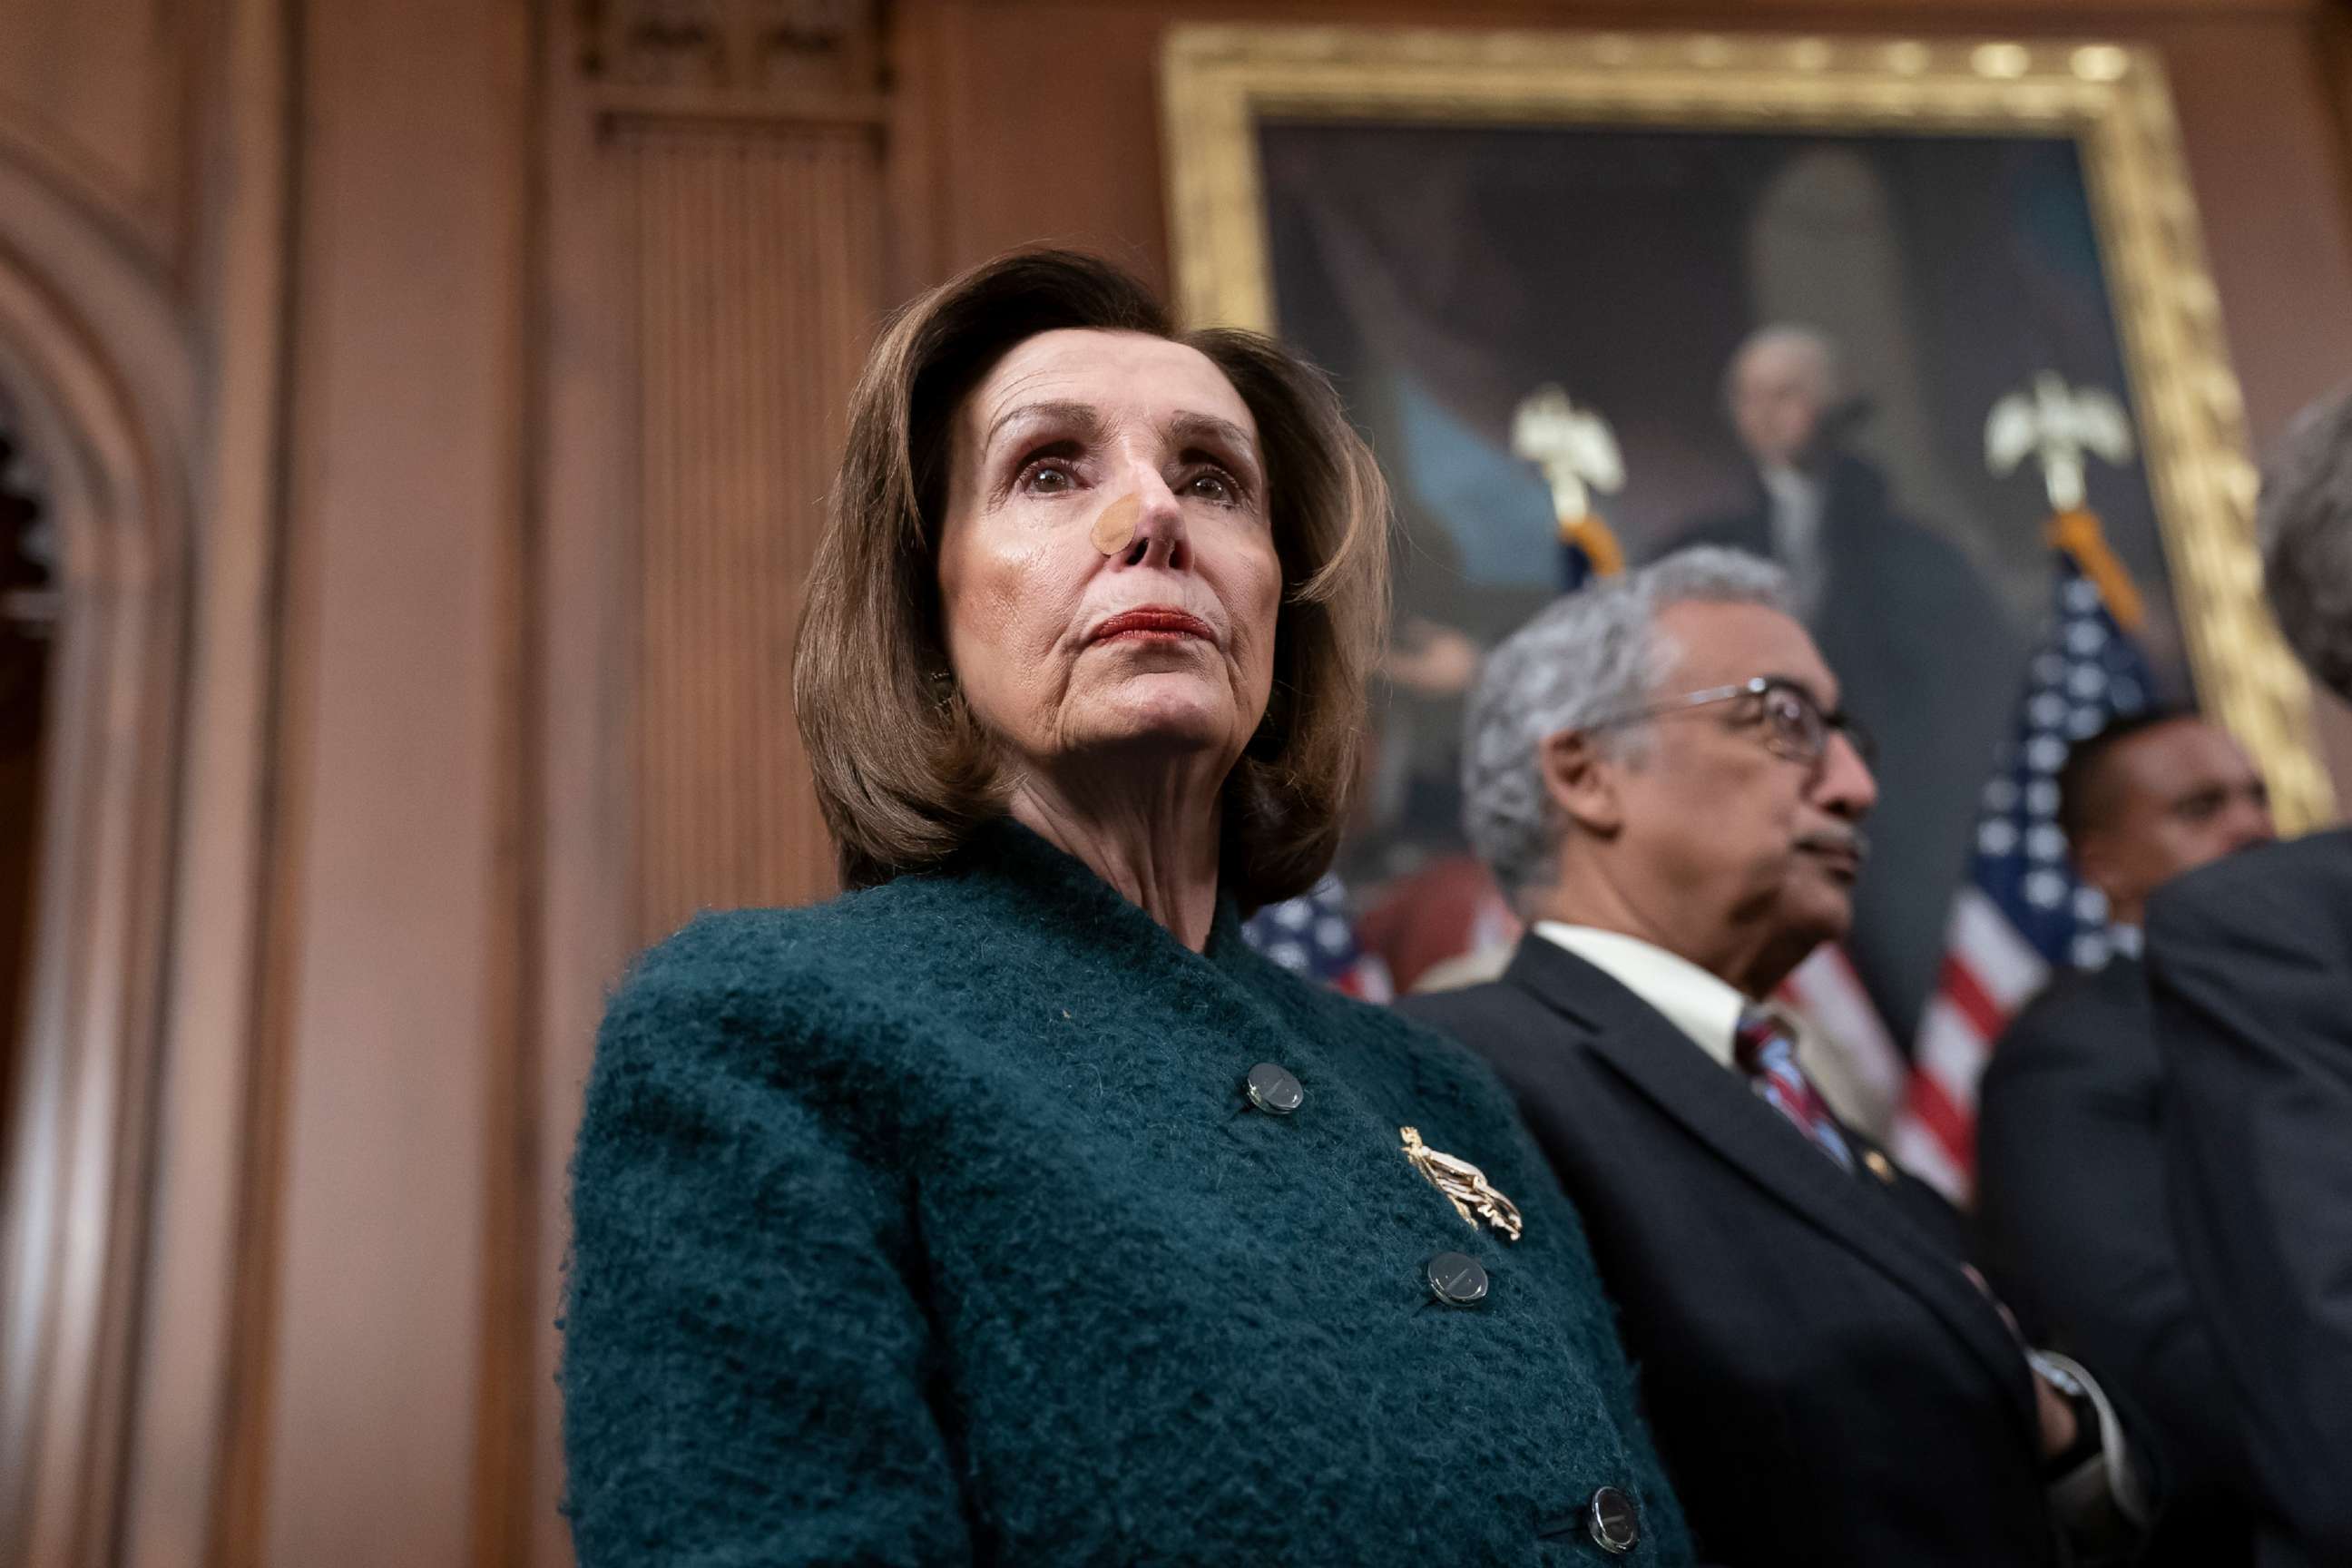 PHOTO: Speaker of the House Nancy Pelosi, D-Calif., attends a health care event at the Capitol in Washington, Dec. 11, 2019.